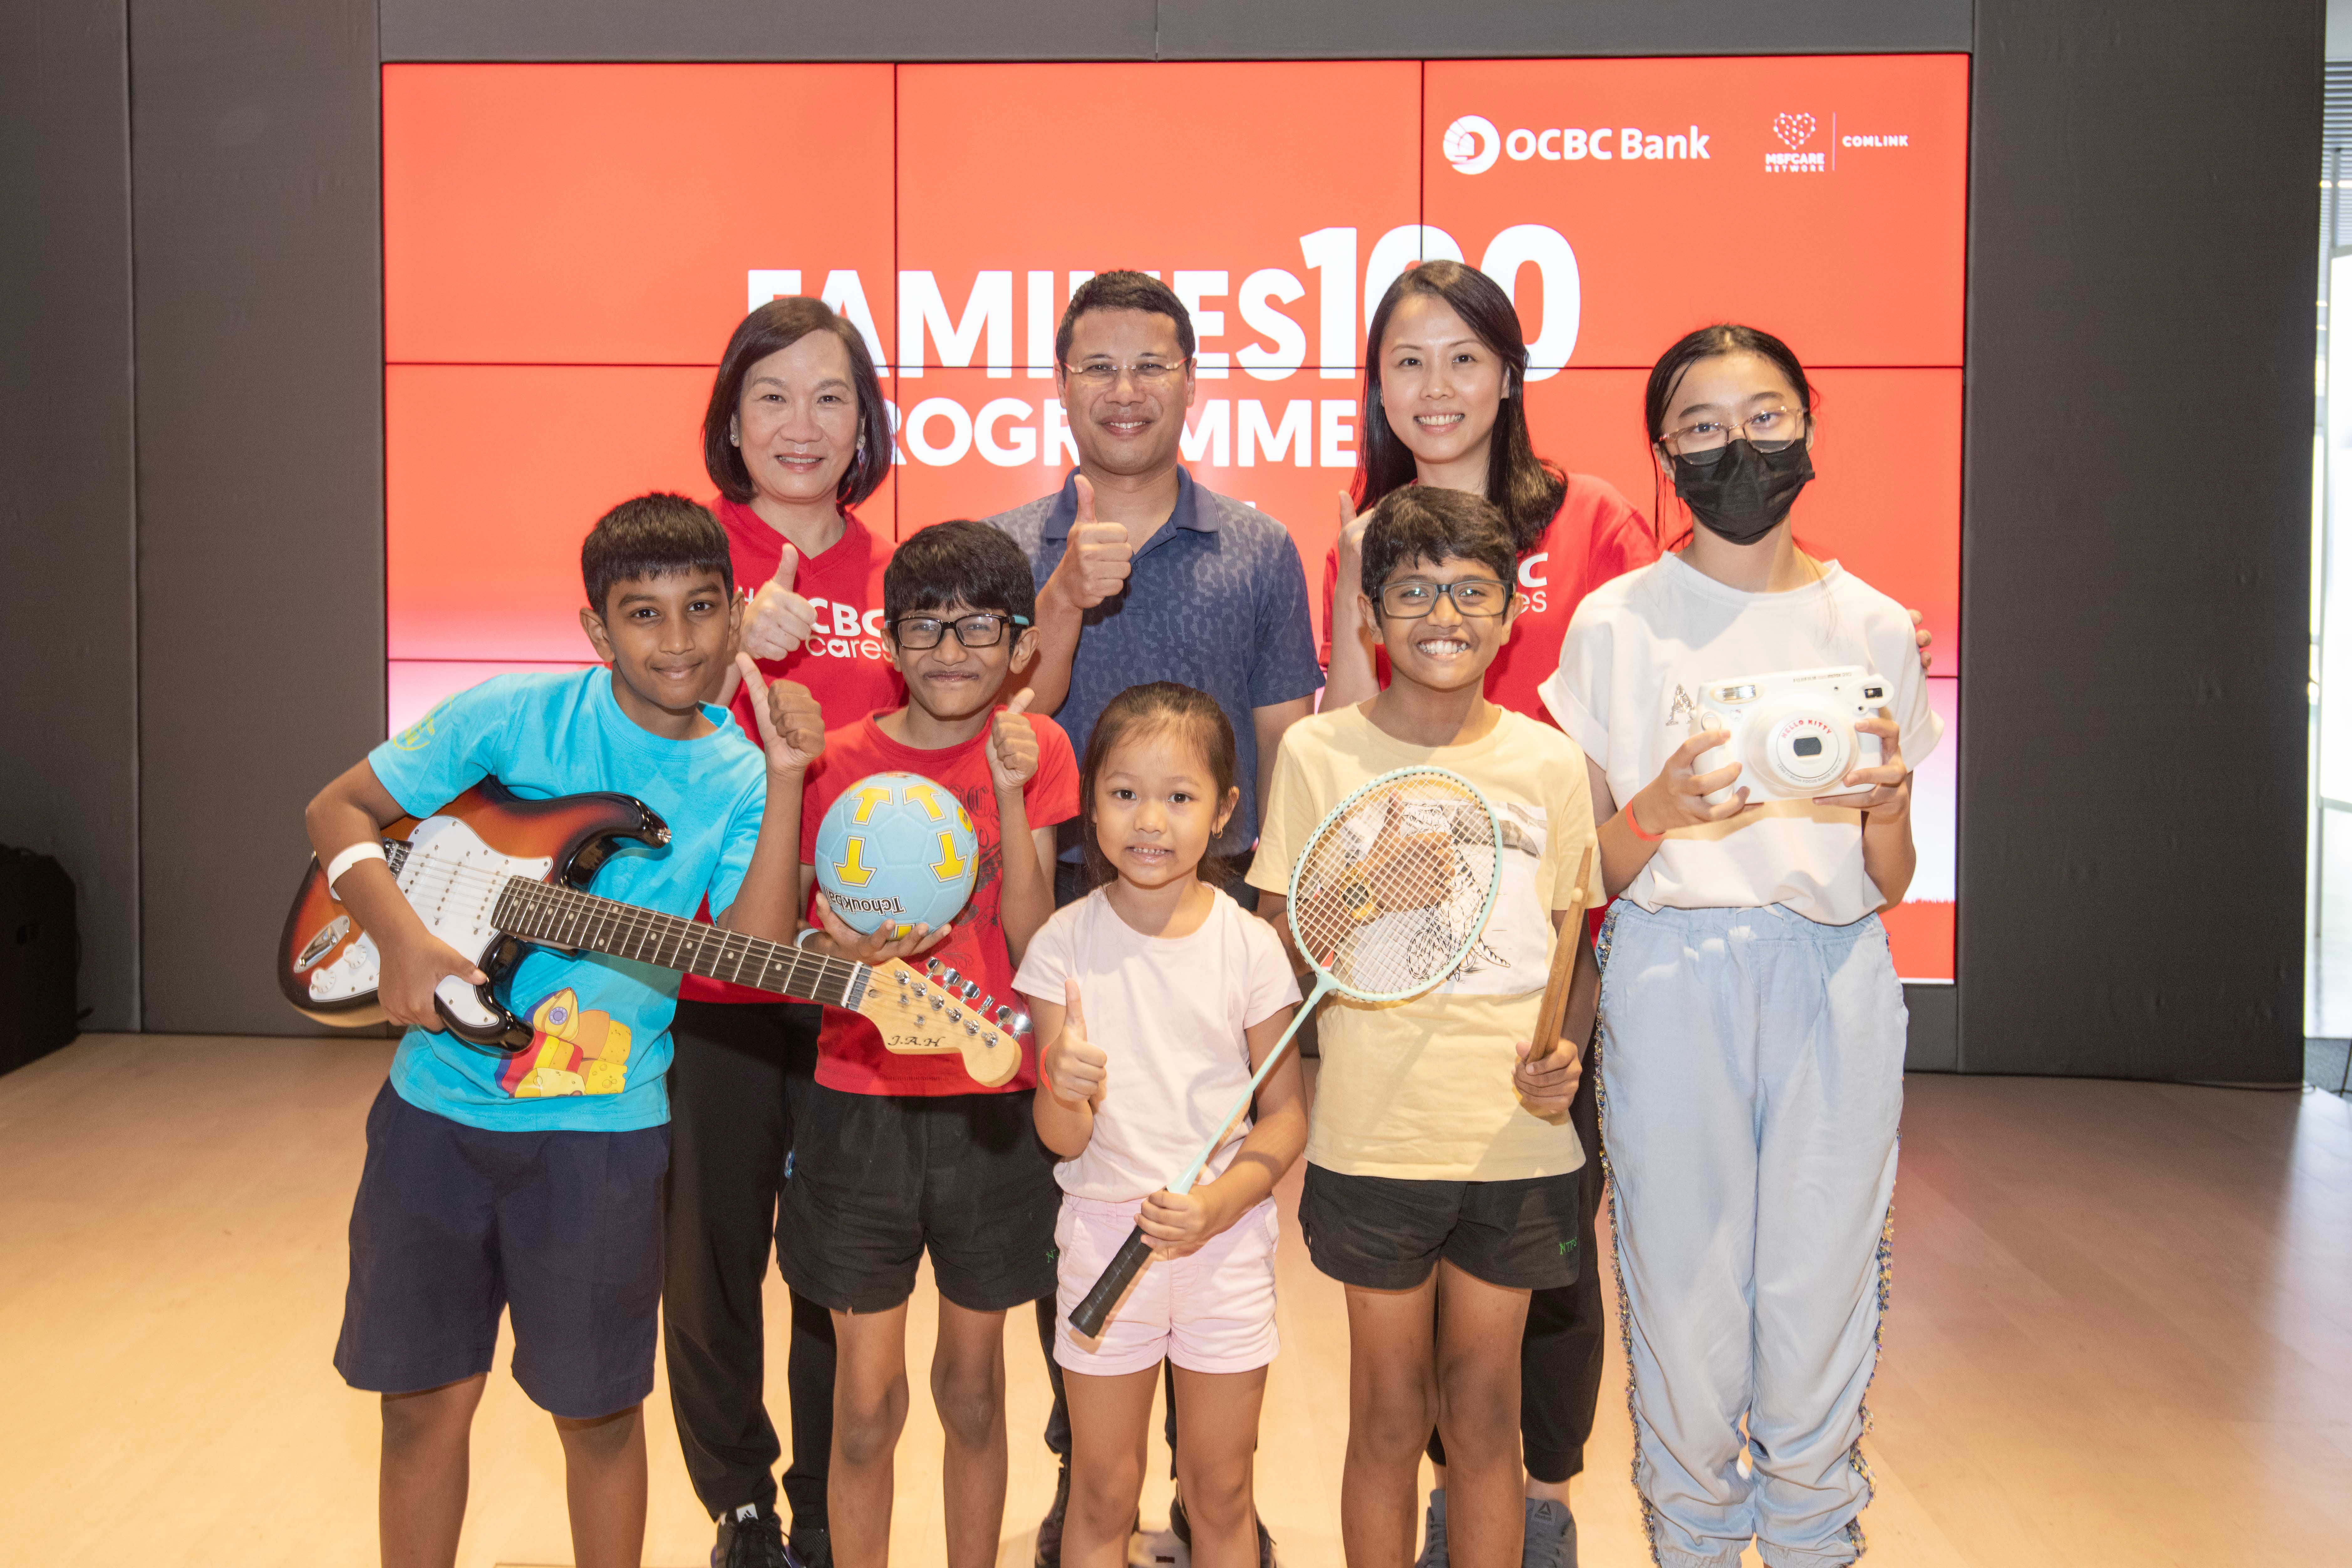 OCBC launches first-of-its-kind social uplift programme to help low-income families